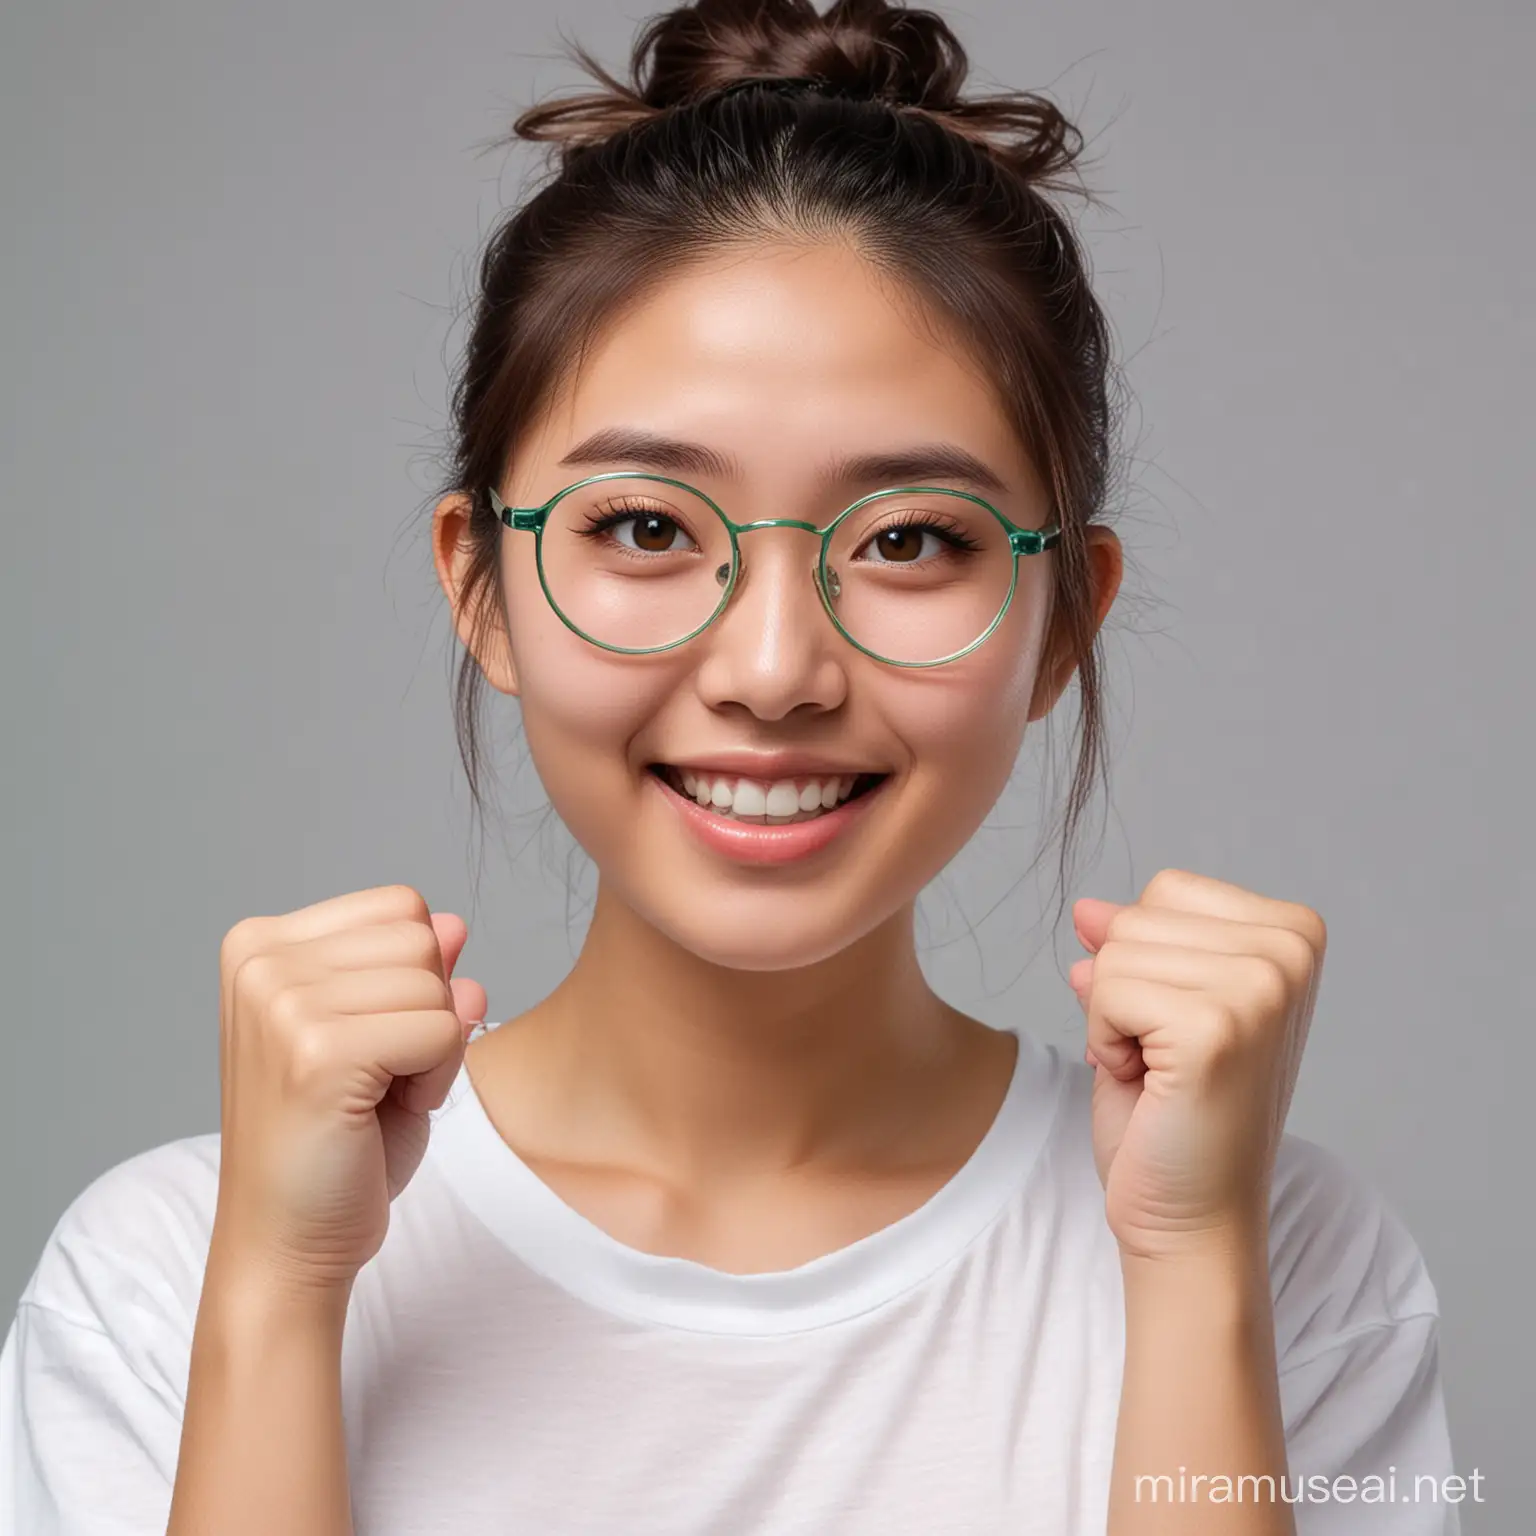 Cheerful Chinese Woman with FrogEye Glasses Smiling and Pouting